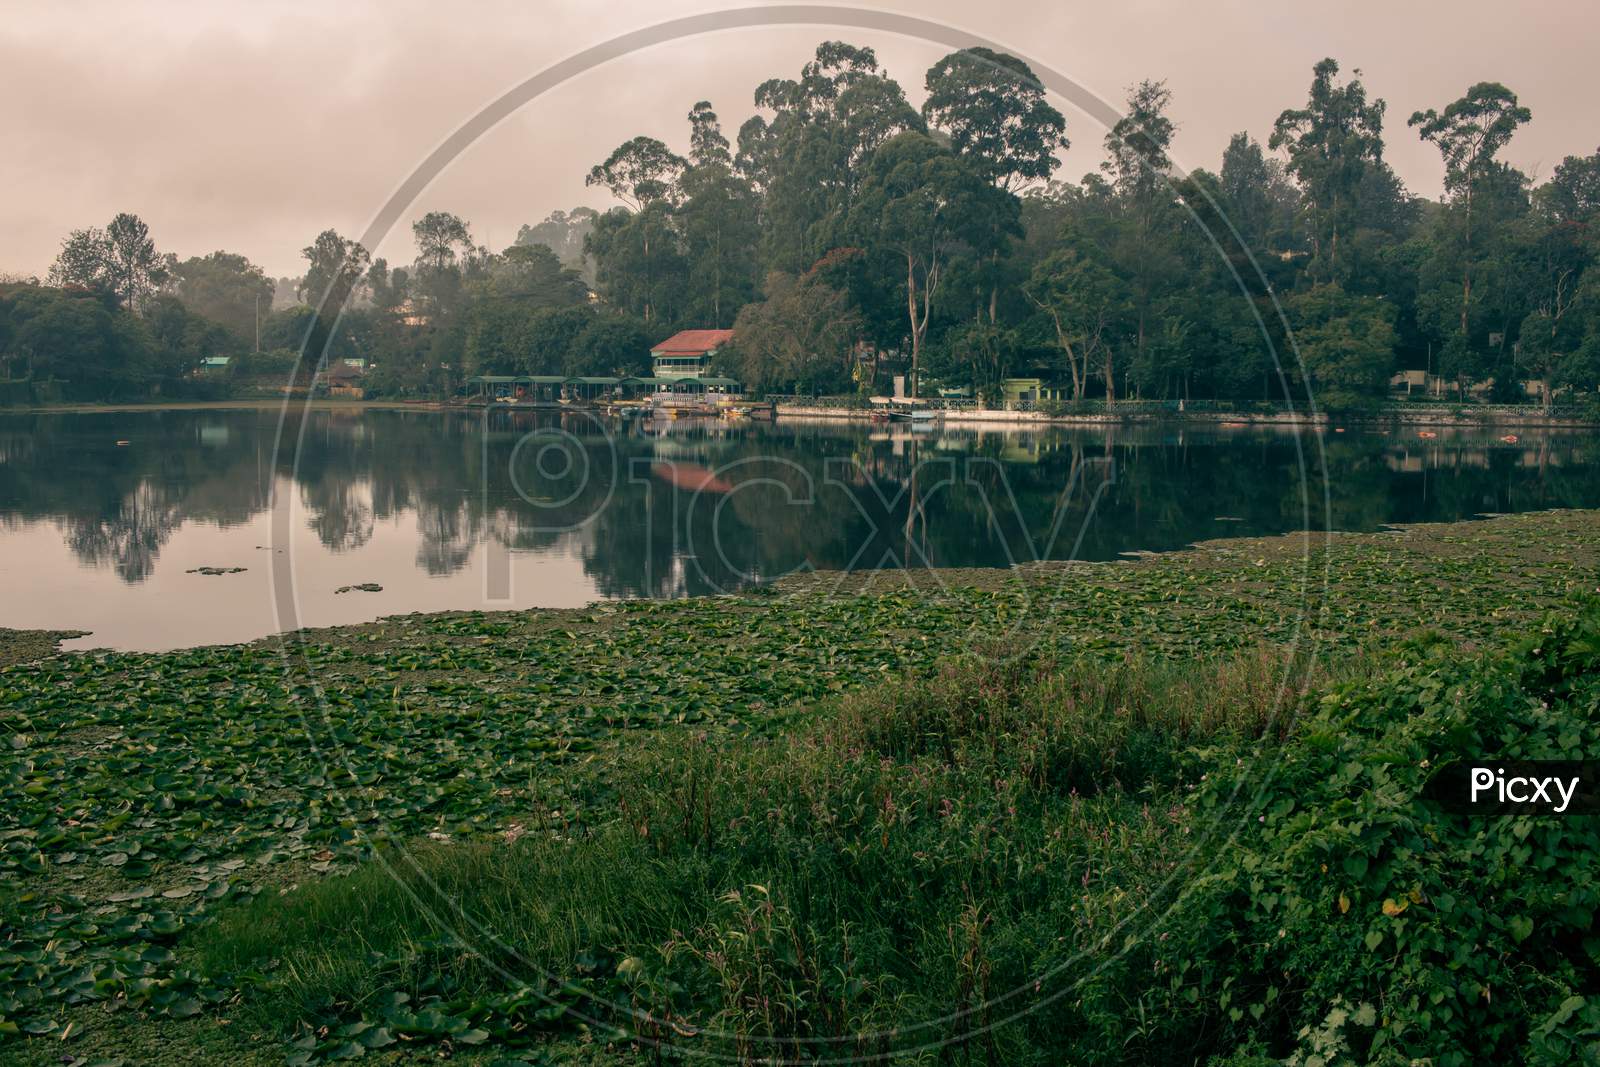 Scenic View Of A Boat House In Yercaud Lake Which Is One Of The Largest Lakes In Tamil Nadu. India